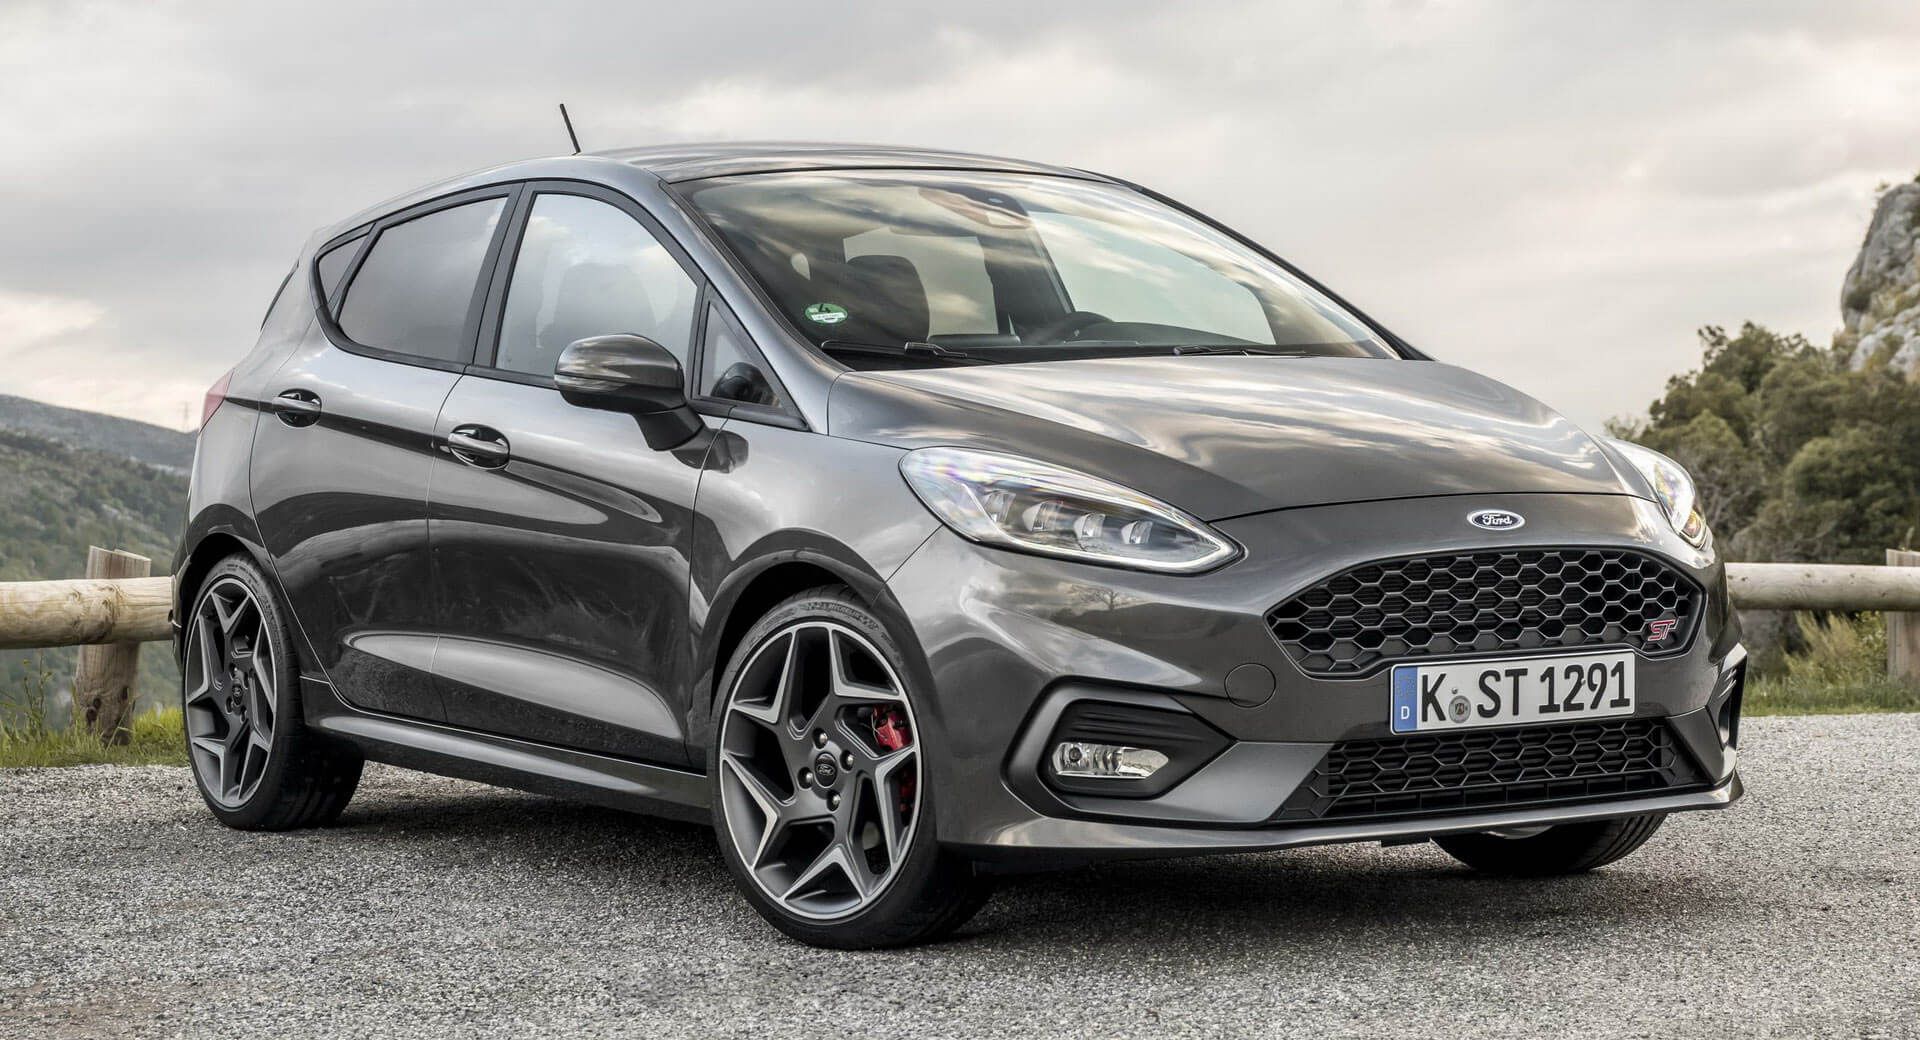 2018 Ford Fiesta ST Priced From £18,995 In The UK | Carscoops